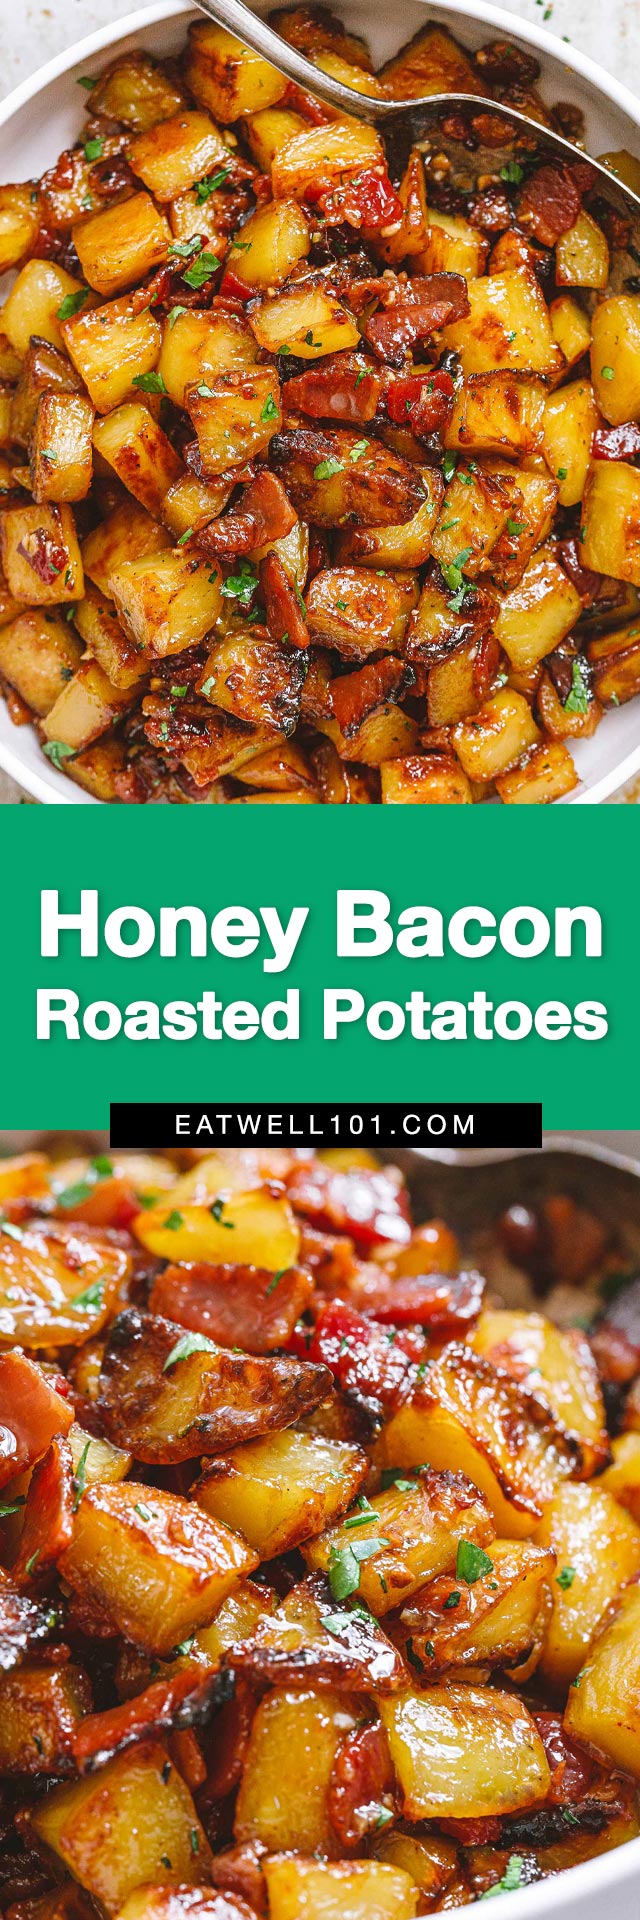 Honey Bacon Roasted Potatoes Recipe - #roasted #potatoes #recipe #eatwell101 - Roasted potatoes are glazed with a delicious honey bacon sauce. This is the best roasted potatoes recipe to serve with your favorite steak, pork chops, or roast chicken!